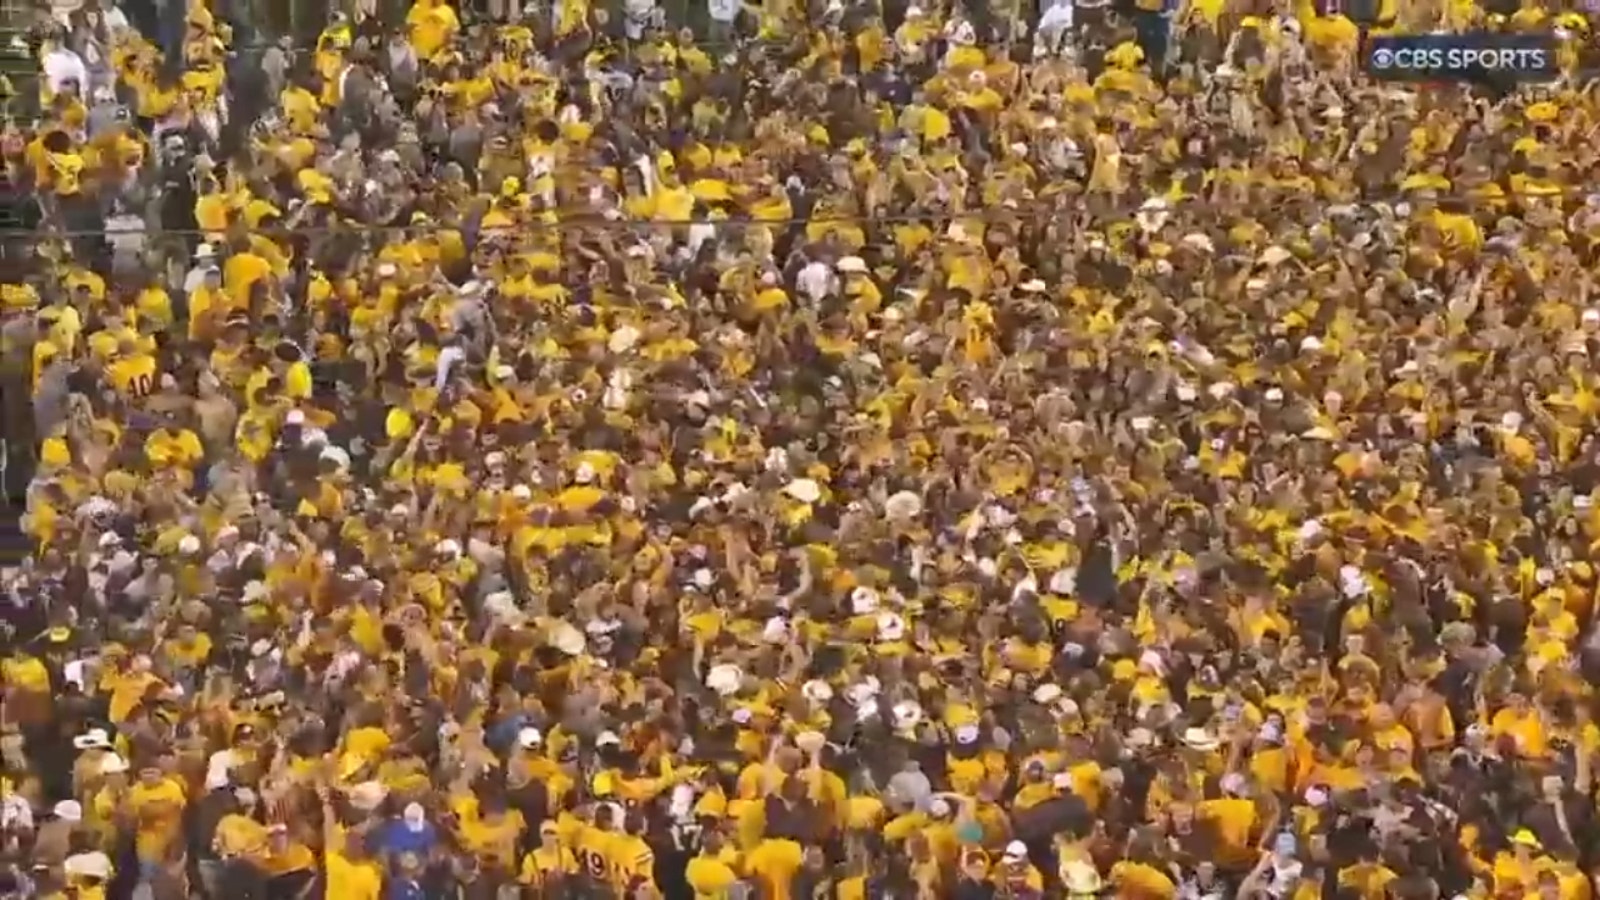 Fans rush the field after Wyoming's upset victory over Texas Tech